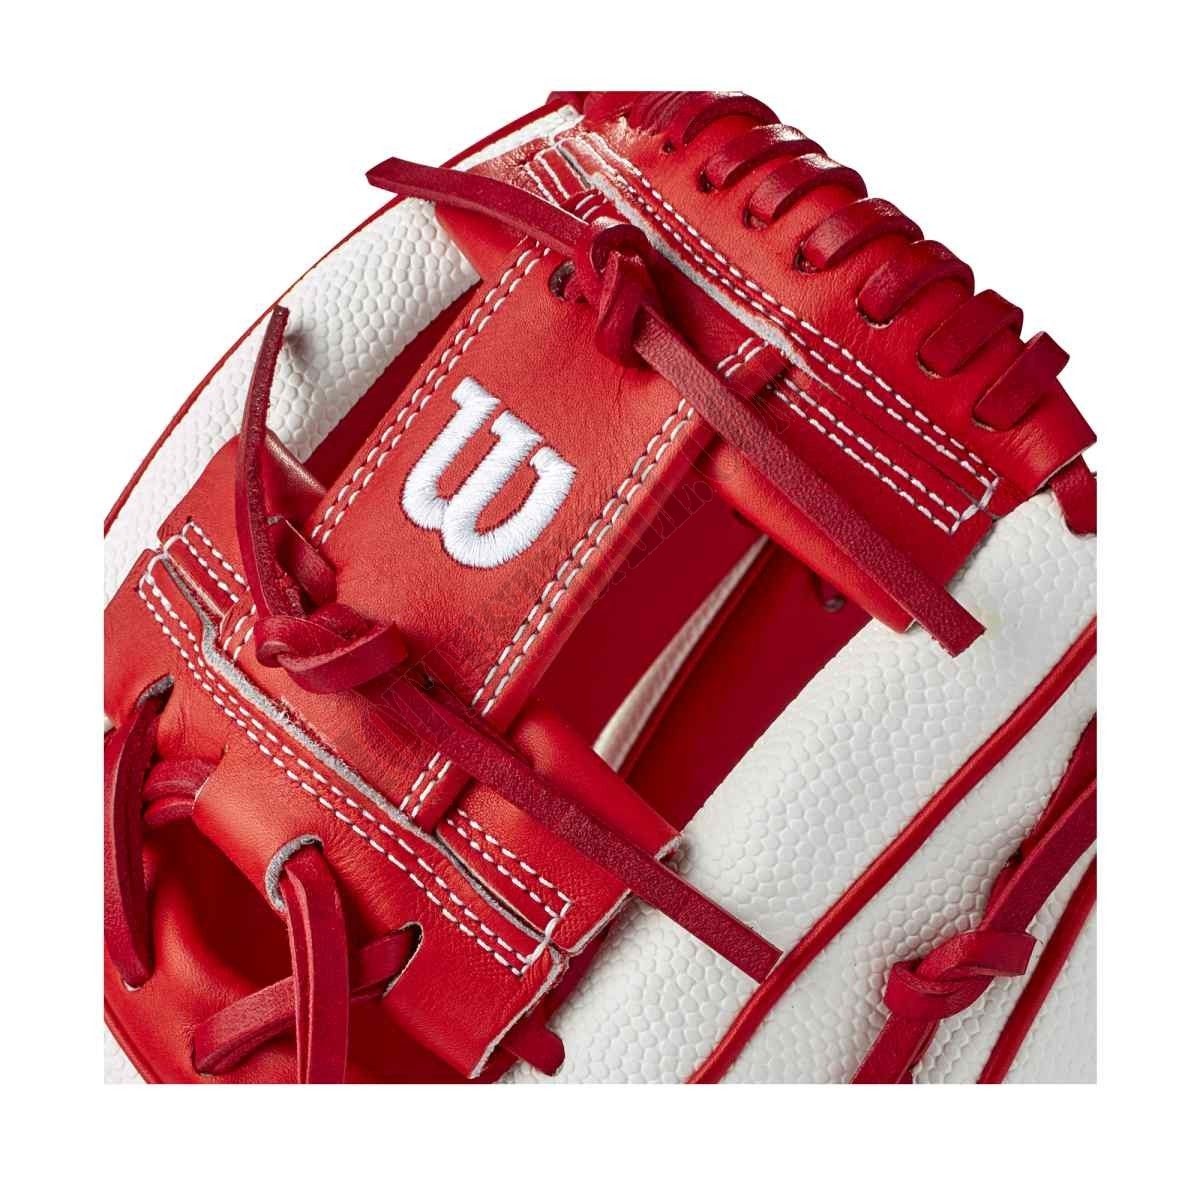 2021 A2000 1786SS Japan 11.5" Infield Baseball Glove - Limited Edition ● Wilson Promotions - -5